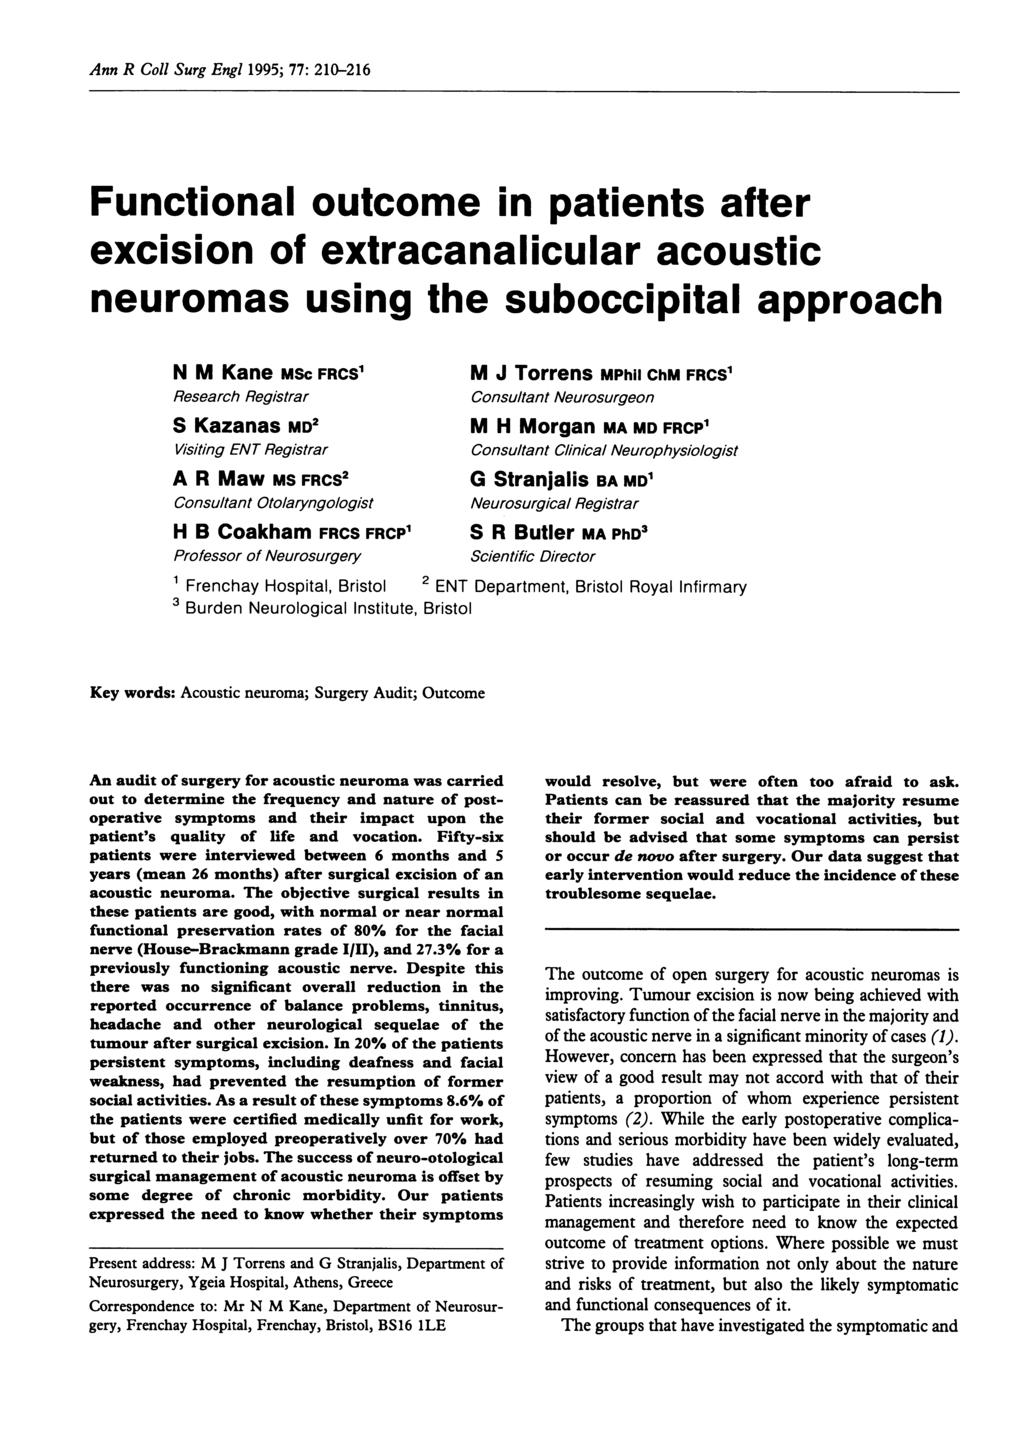 Ann R oll Surg Engl 1995; 77: 210-216 Functional outcome in patients after excision of extracanalicular acoustic neuromas using the suboccipital approach N M Kane MSc FRS' Research Registrar S